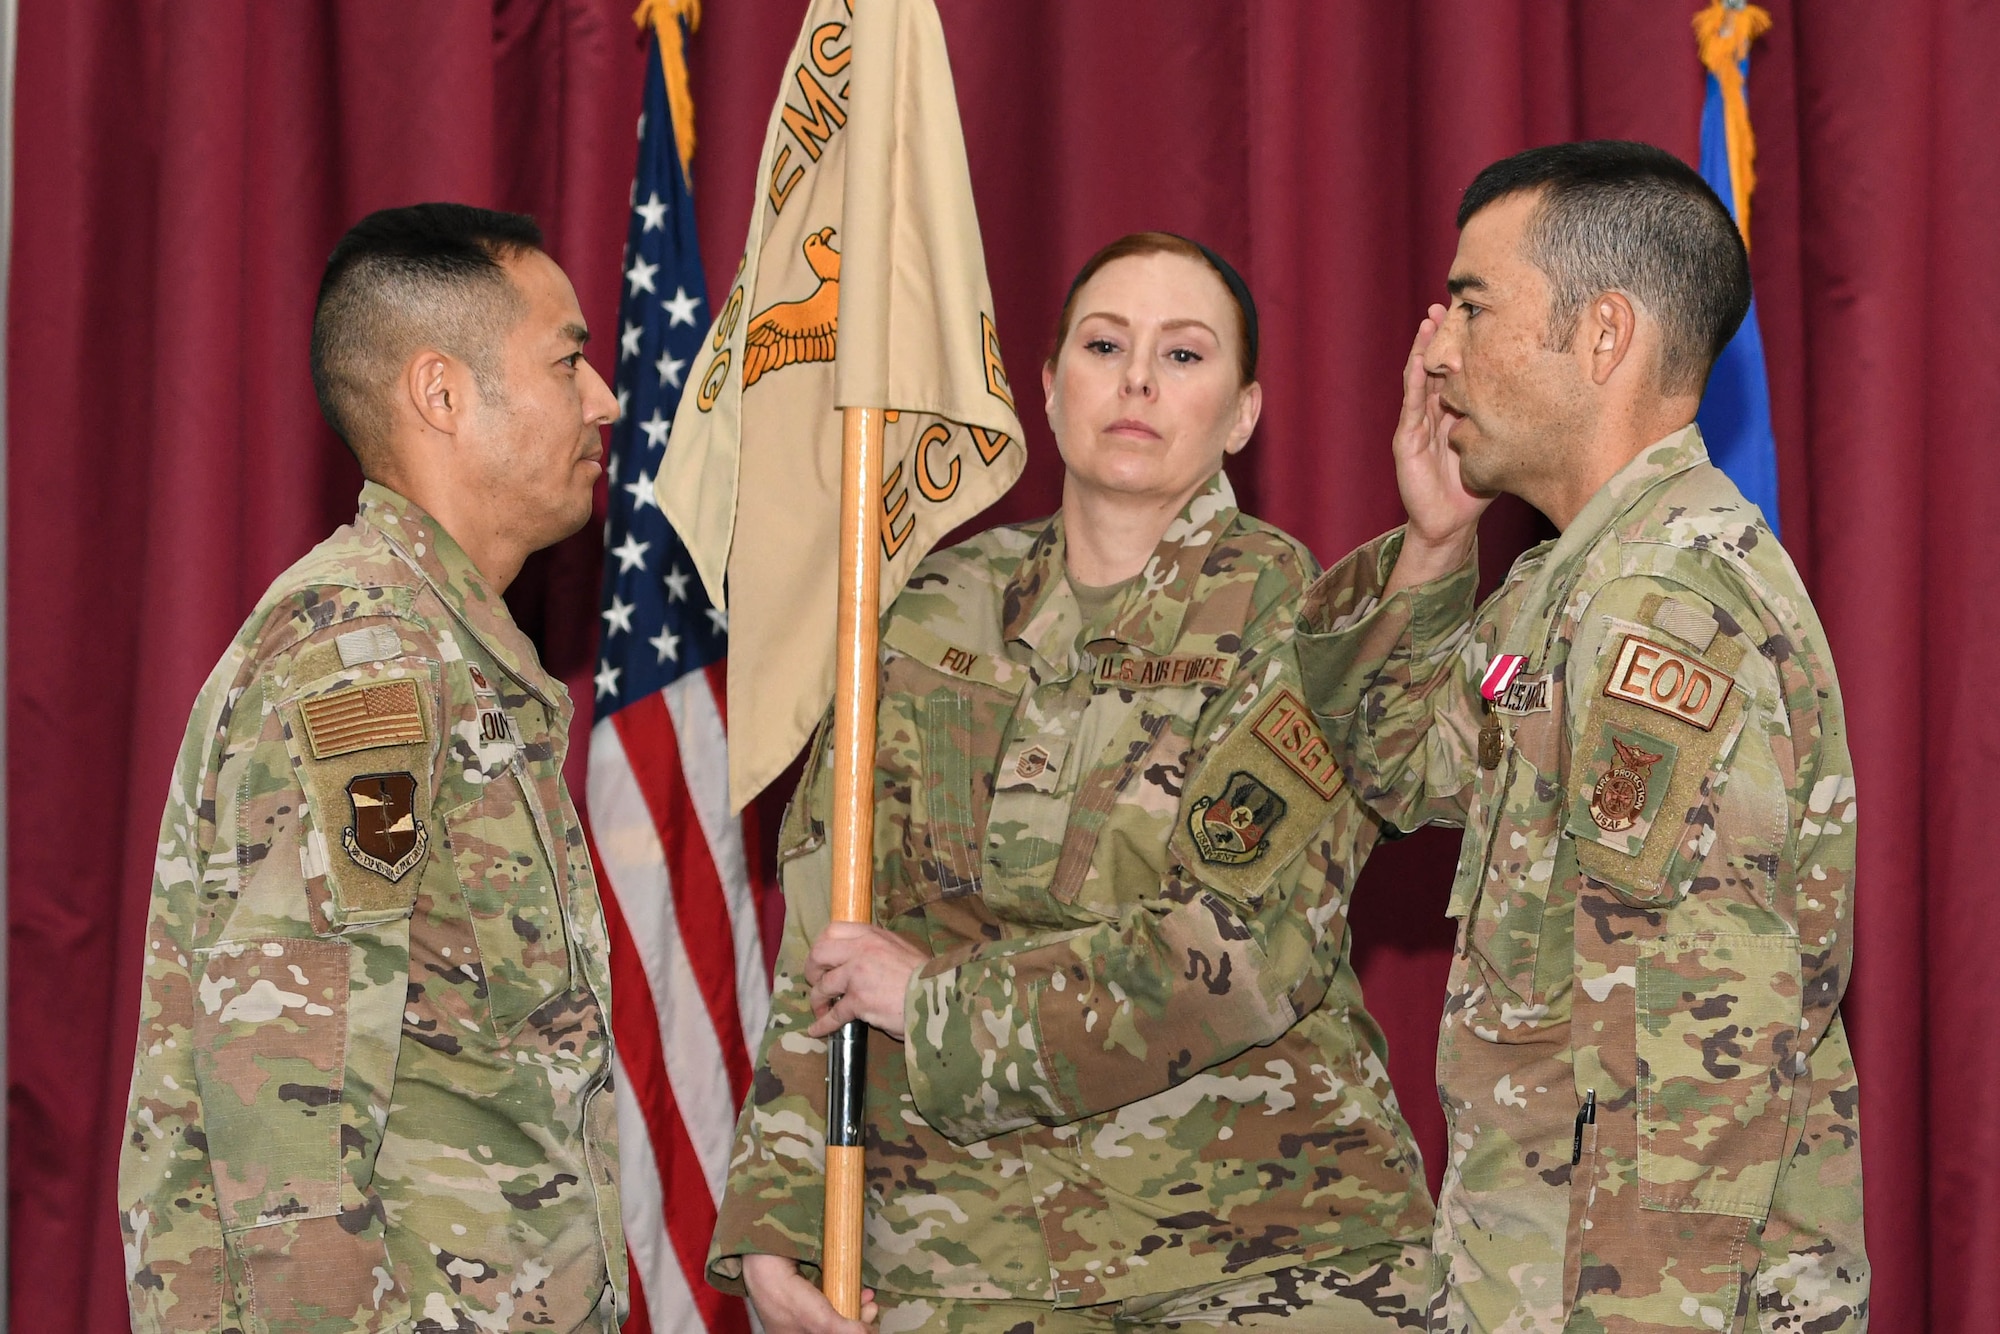 Lt. Col. Brandon Hori, the outgoing commander of the 380th Expeditionary Civil Engineer Squadron, salutes Colonel Todd T. Inouye, the previous 380th Expeditionary Mission Support Group commander and new 380th Air Expeditionary Wing A1/4/6/7 staff director, after relinquishing command of the 380th ECES during a change of command ceremony, May 20, 2022 at Al Dhafra Air Base, United Arab Emirates. Hori led in critical and essential roles at the Wing and squadron levels and served as the wing's emergency operations center director numerous times during exercises and real world emergencies.